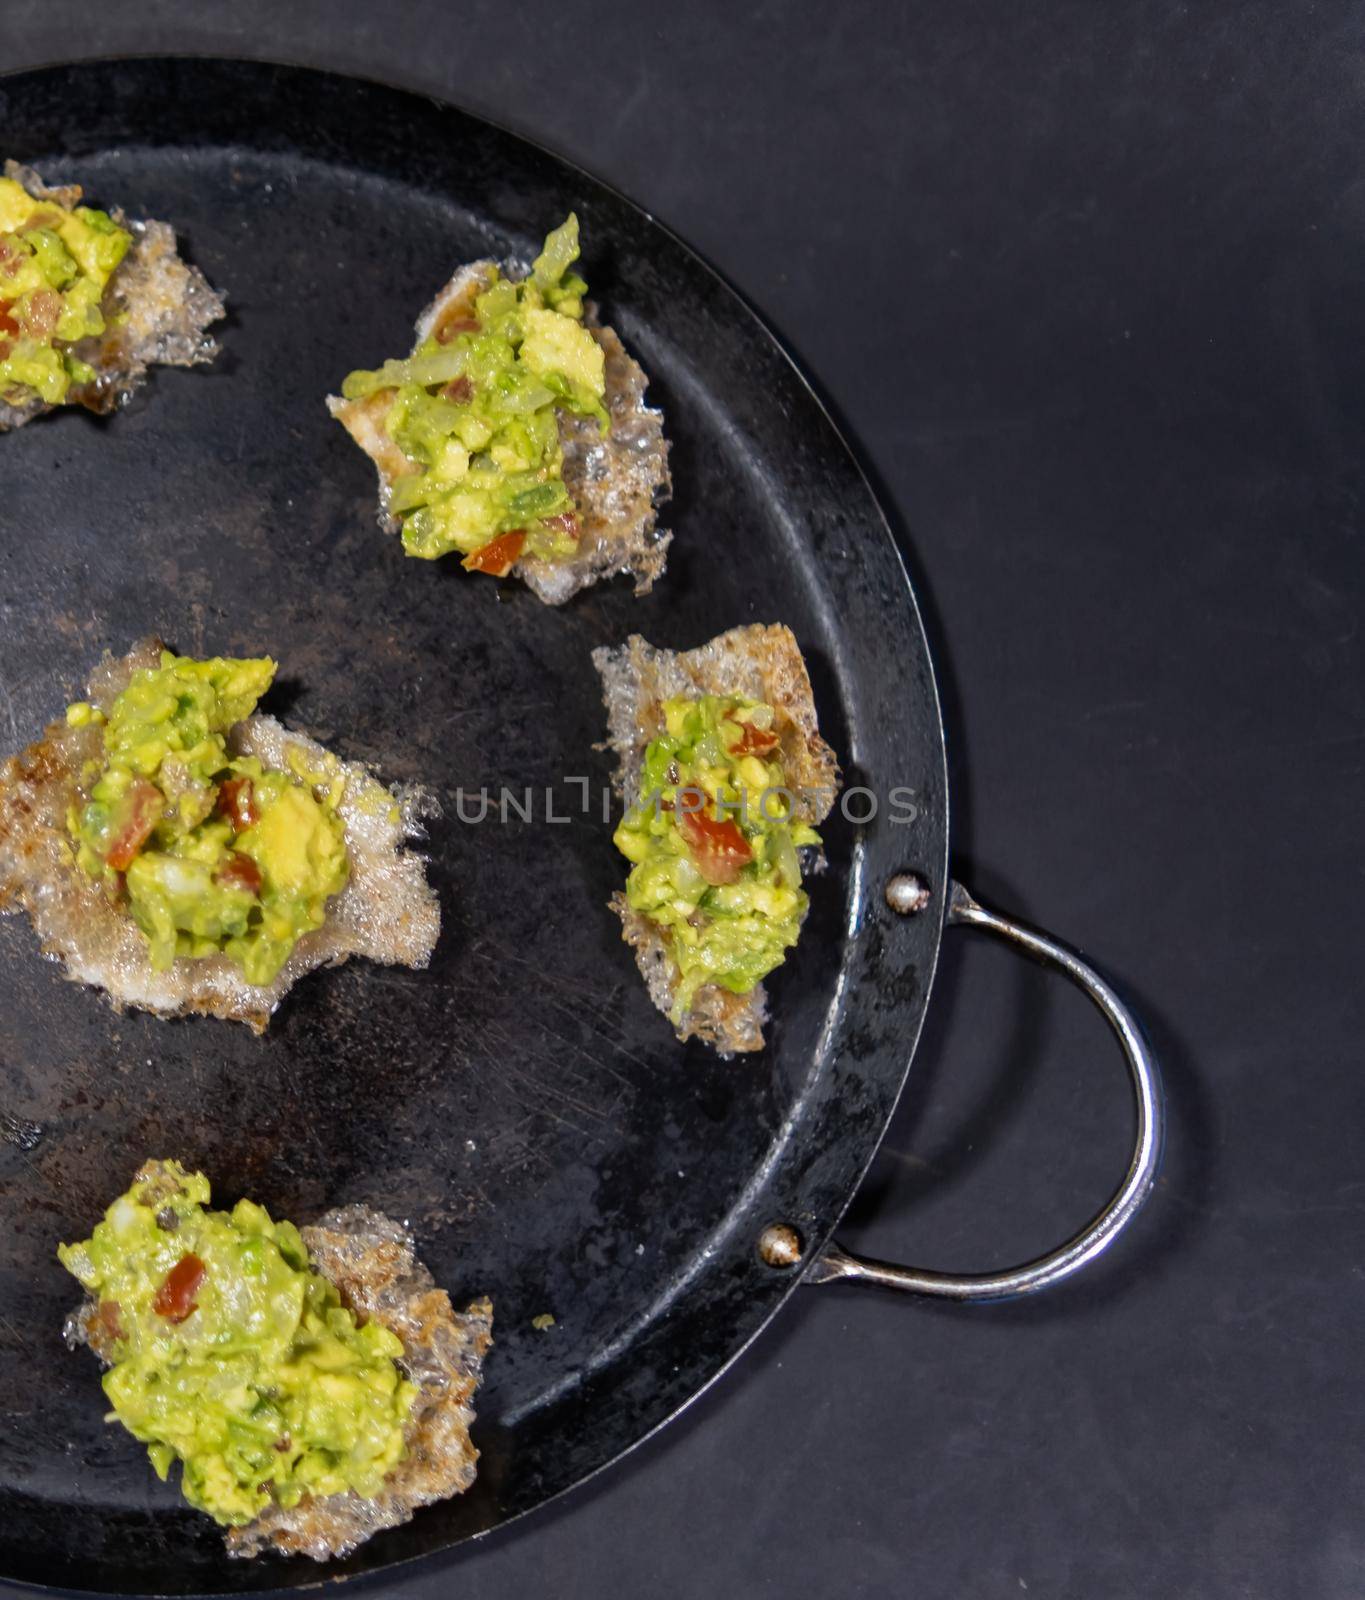 Pork rinds with guacamole on traditional Mexican comal by Kanelbulle